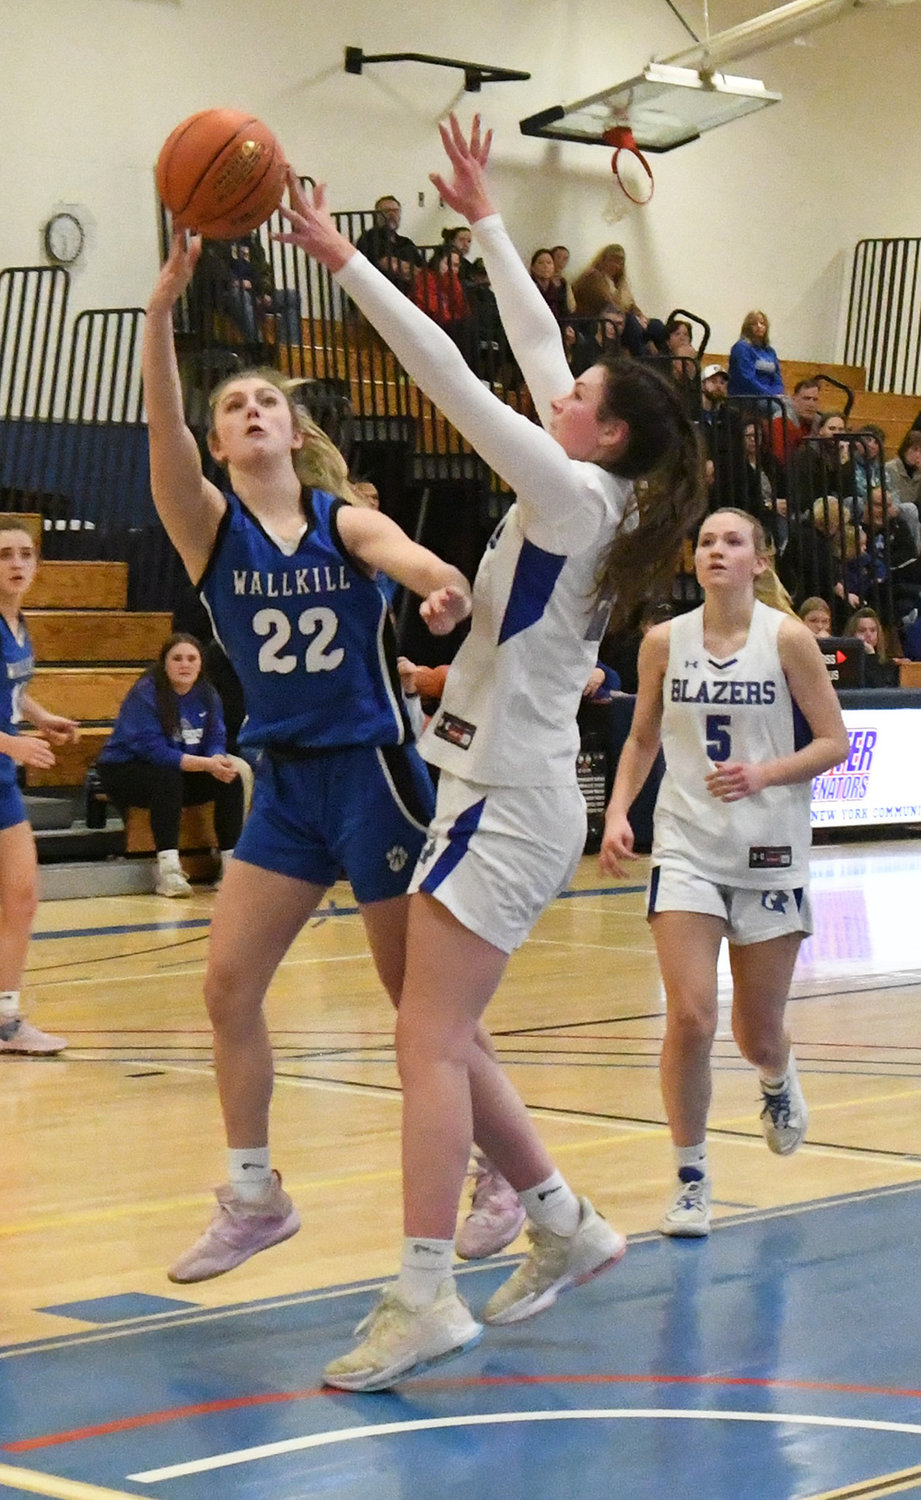 Wallkill's Emma Spindler shoots the ball as Millbrook's Natalie Fox defends and Beth Bosan looks on during Thursday's MHAL championship girls' basketball game at SUNY Ulster in Stone Ridge.